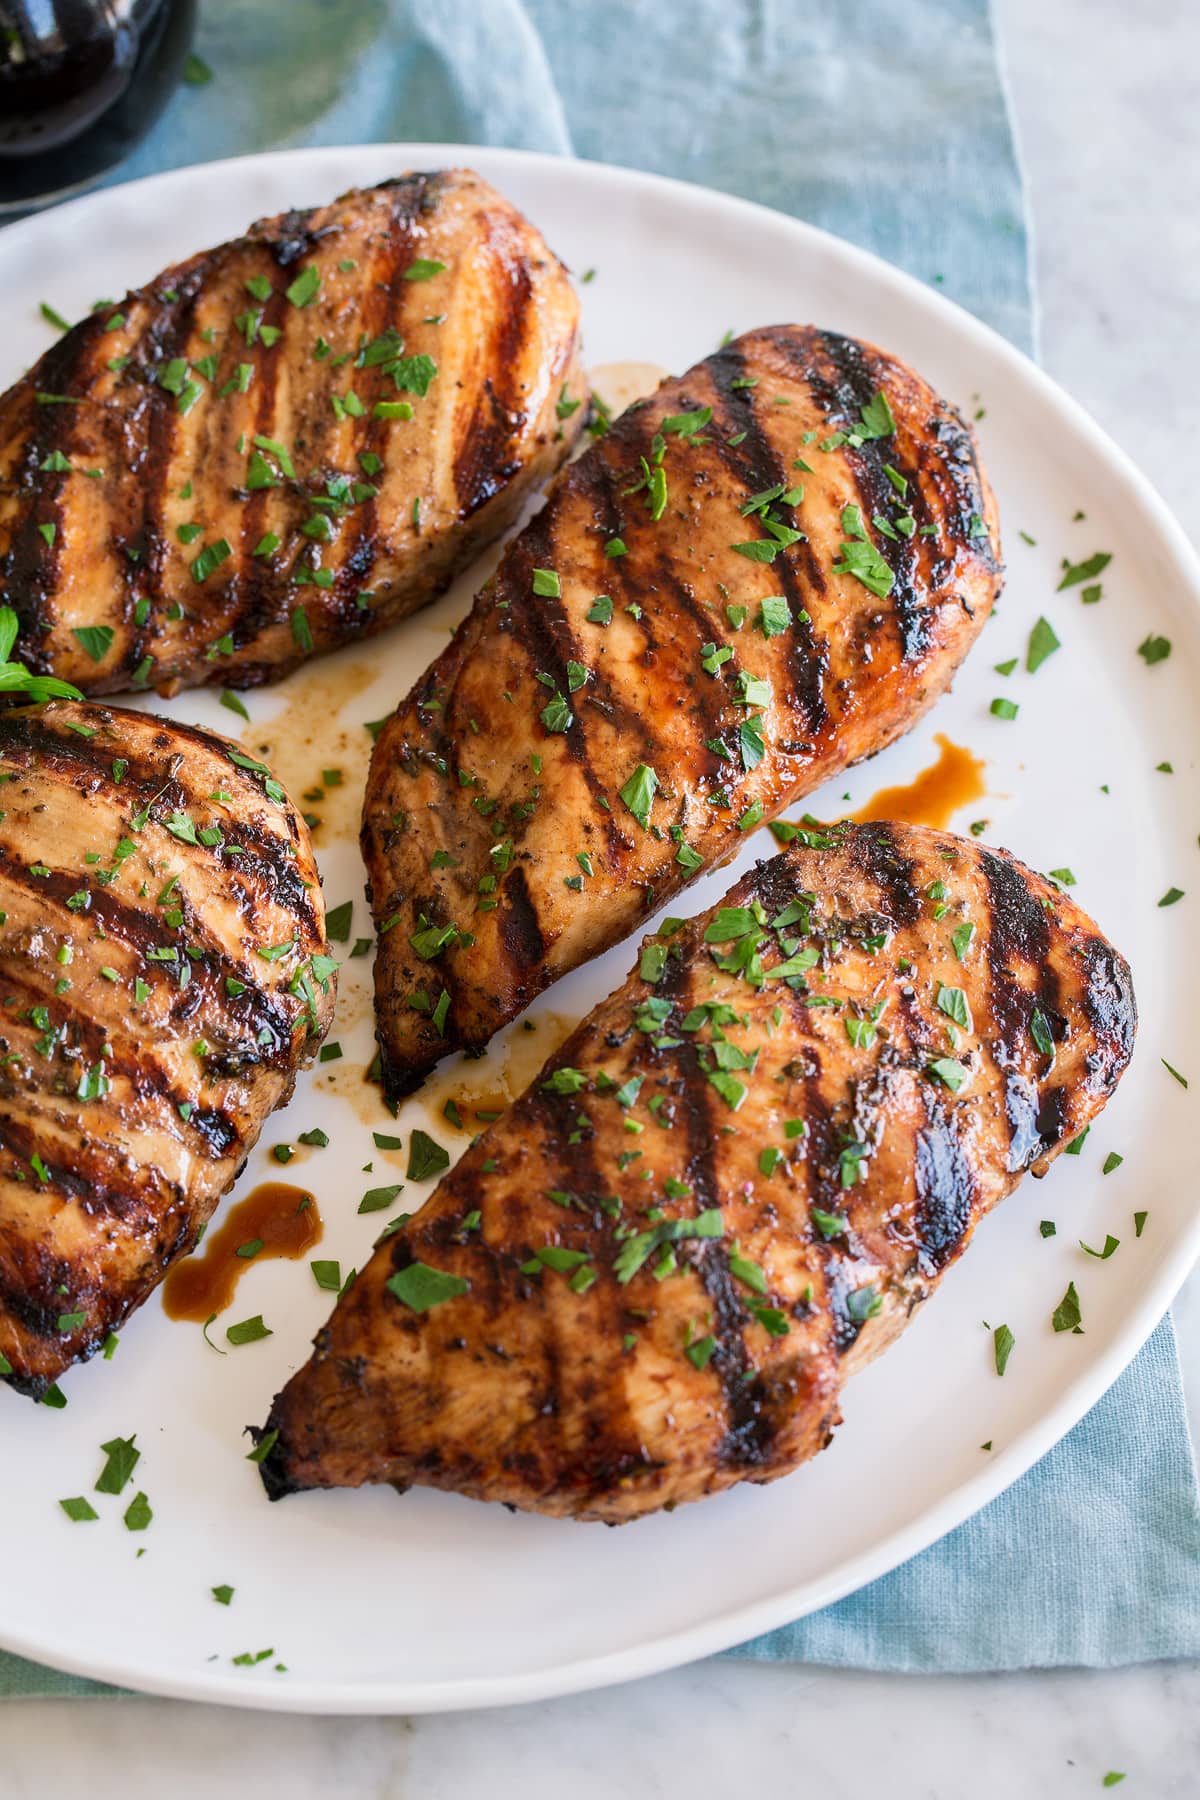 Balsamic chicken breasts shown on a white plate over a blue cloth on a marble surface.